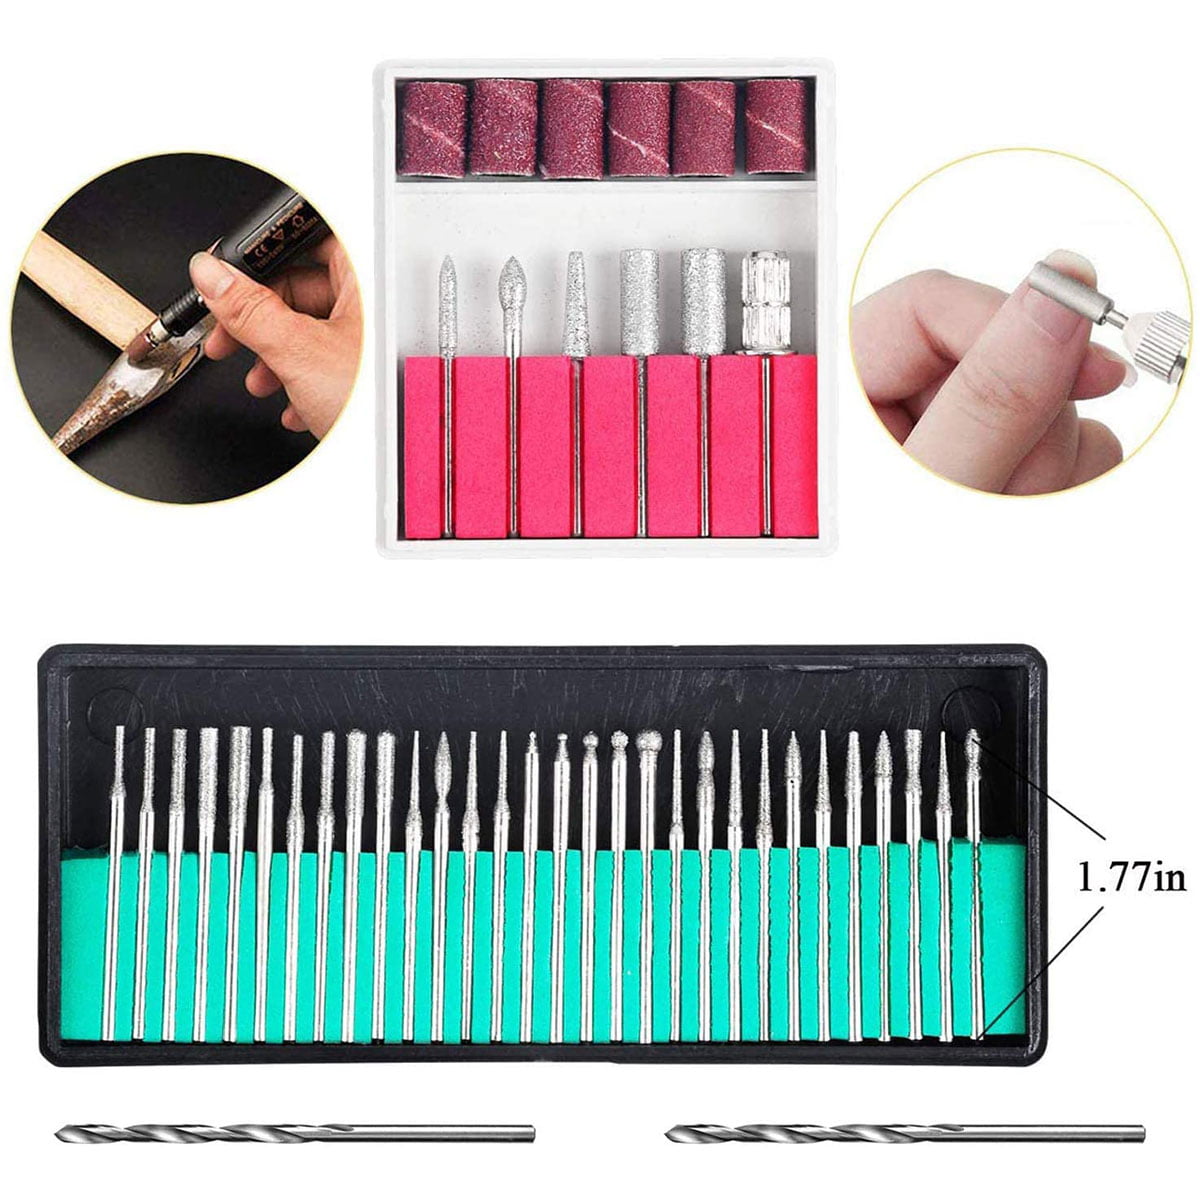 Hands DIY 108pcs Engraving Tool Kit Electric Micro Engraver Etching Pen DIY Rotary Tool Set with Scriber Pen Stencils Grinding Needles for Jewelry